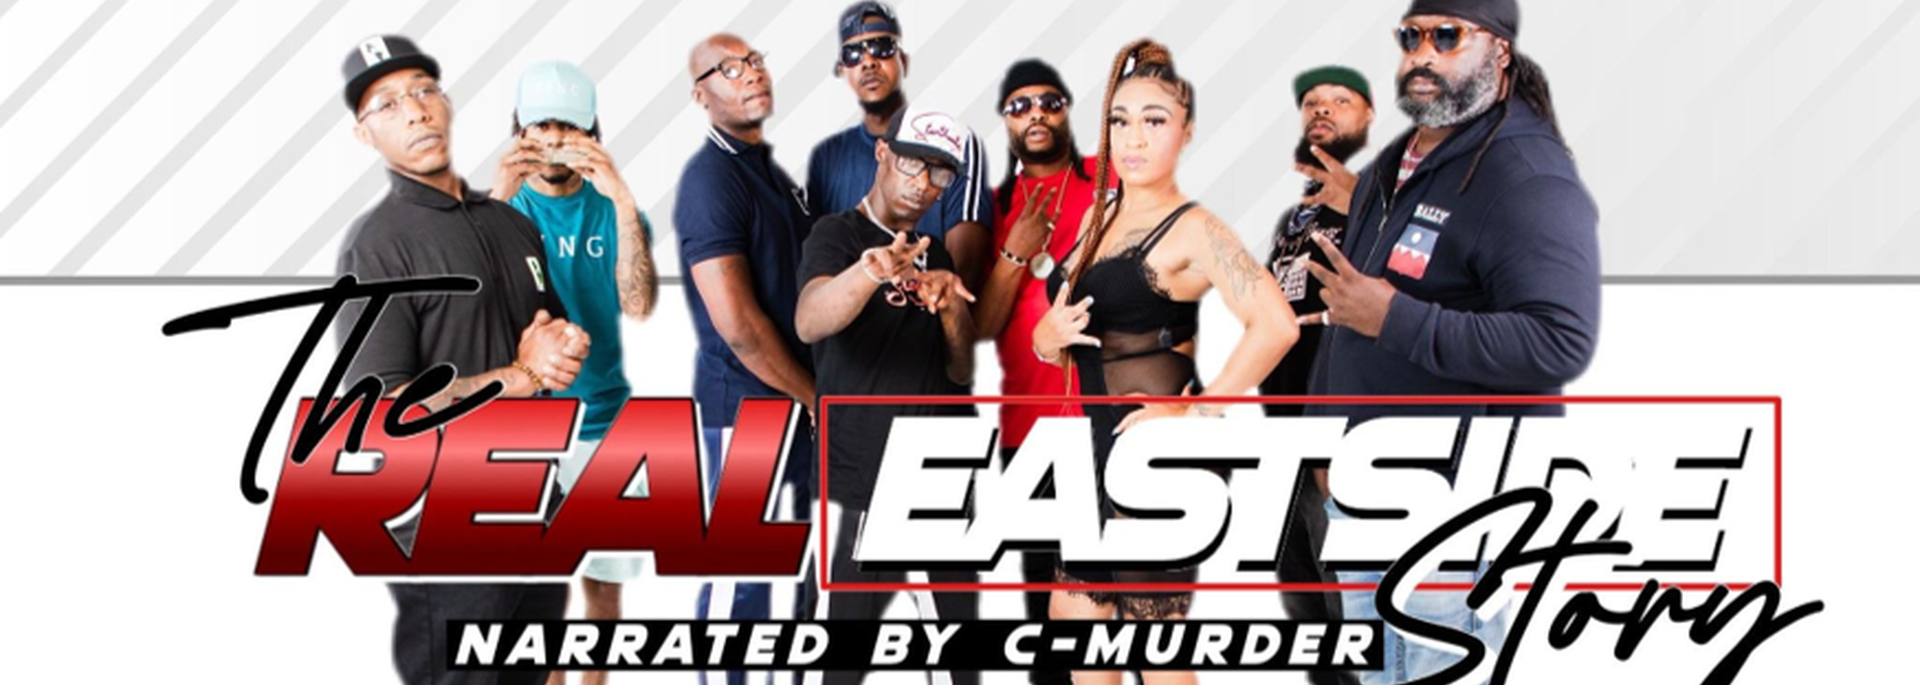 The Real Eastside Story Season 1. Narrated by C-Murder